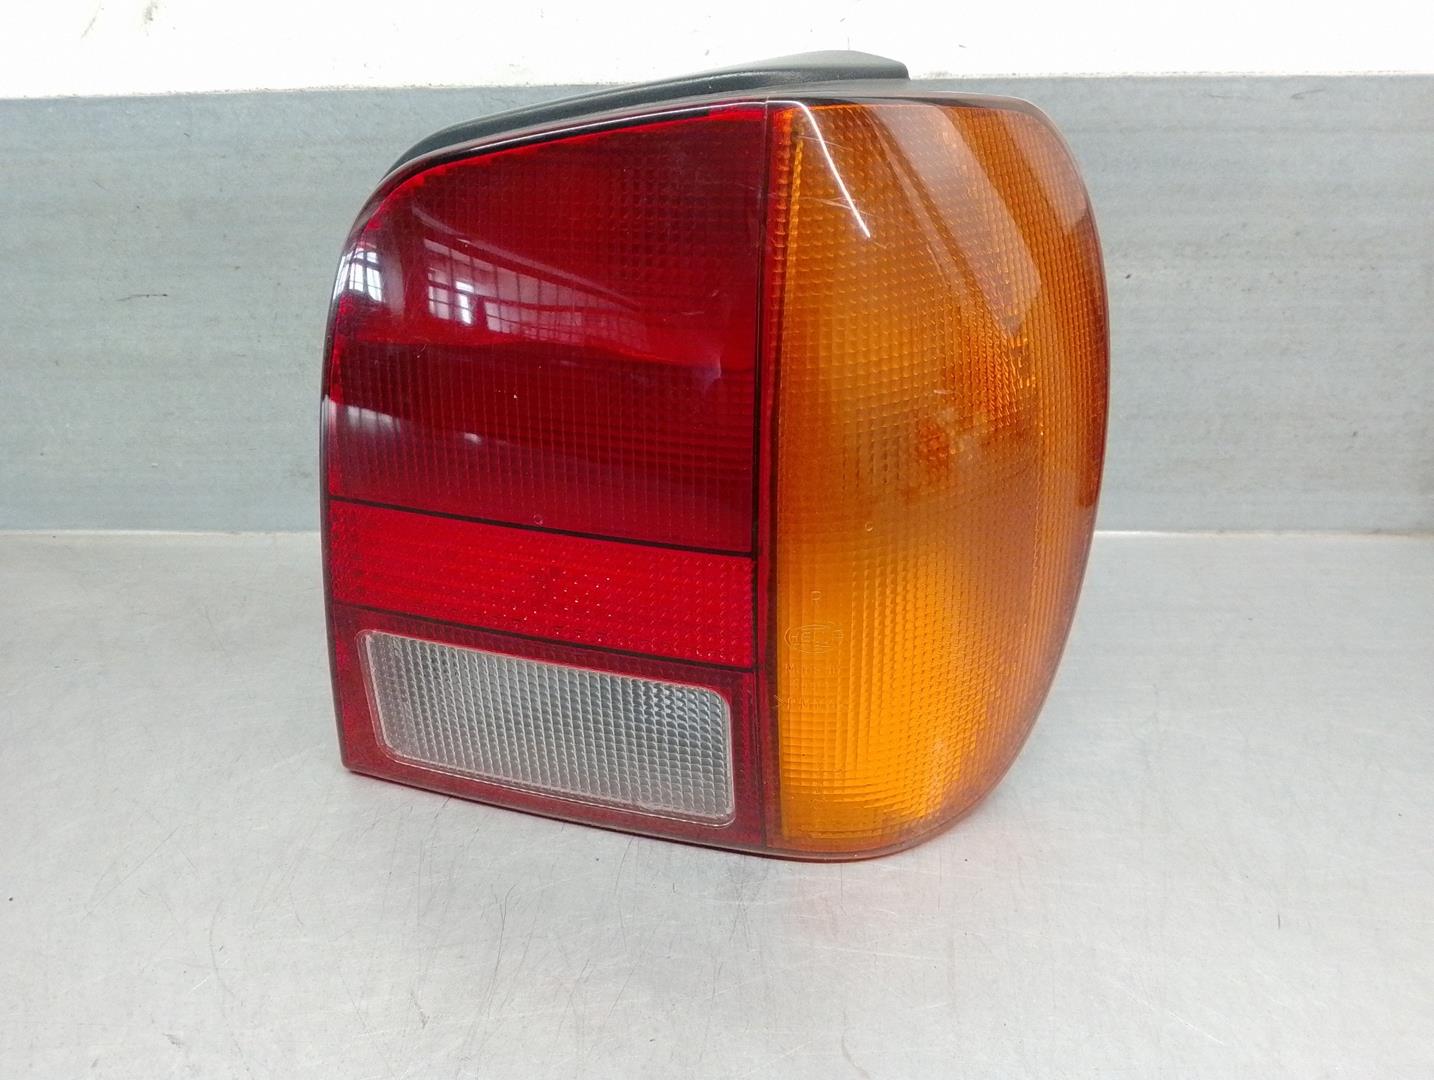 VOLKSWAGEN Polo 3 generation (1994-2002) Rear Right Taillight Lamp 6N0945096, 6N0945258A, 5PUERTAS 19920024